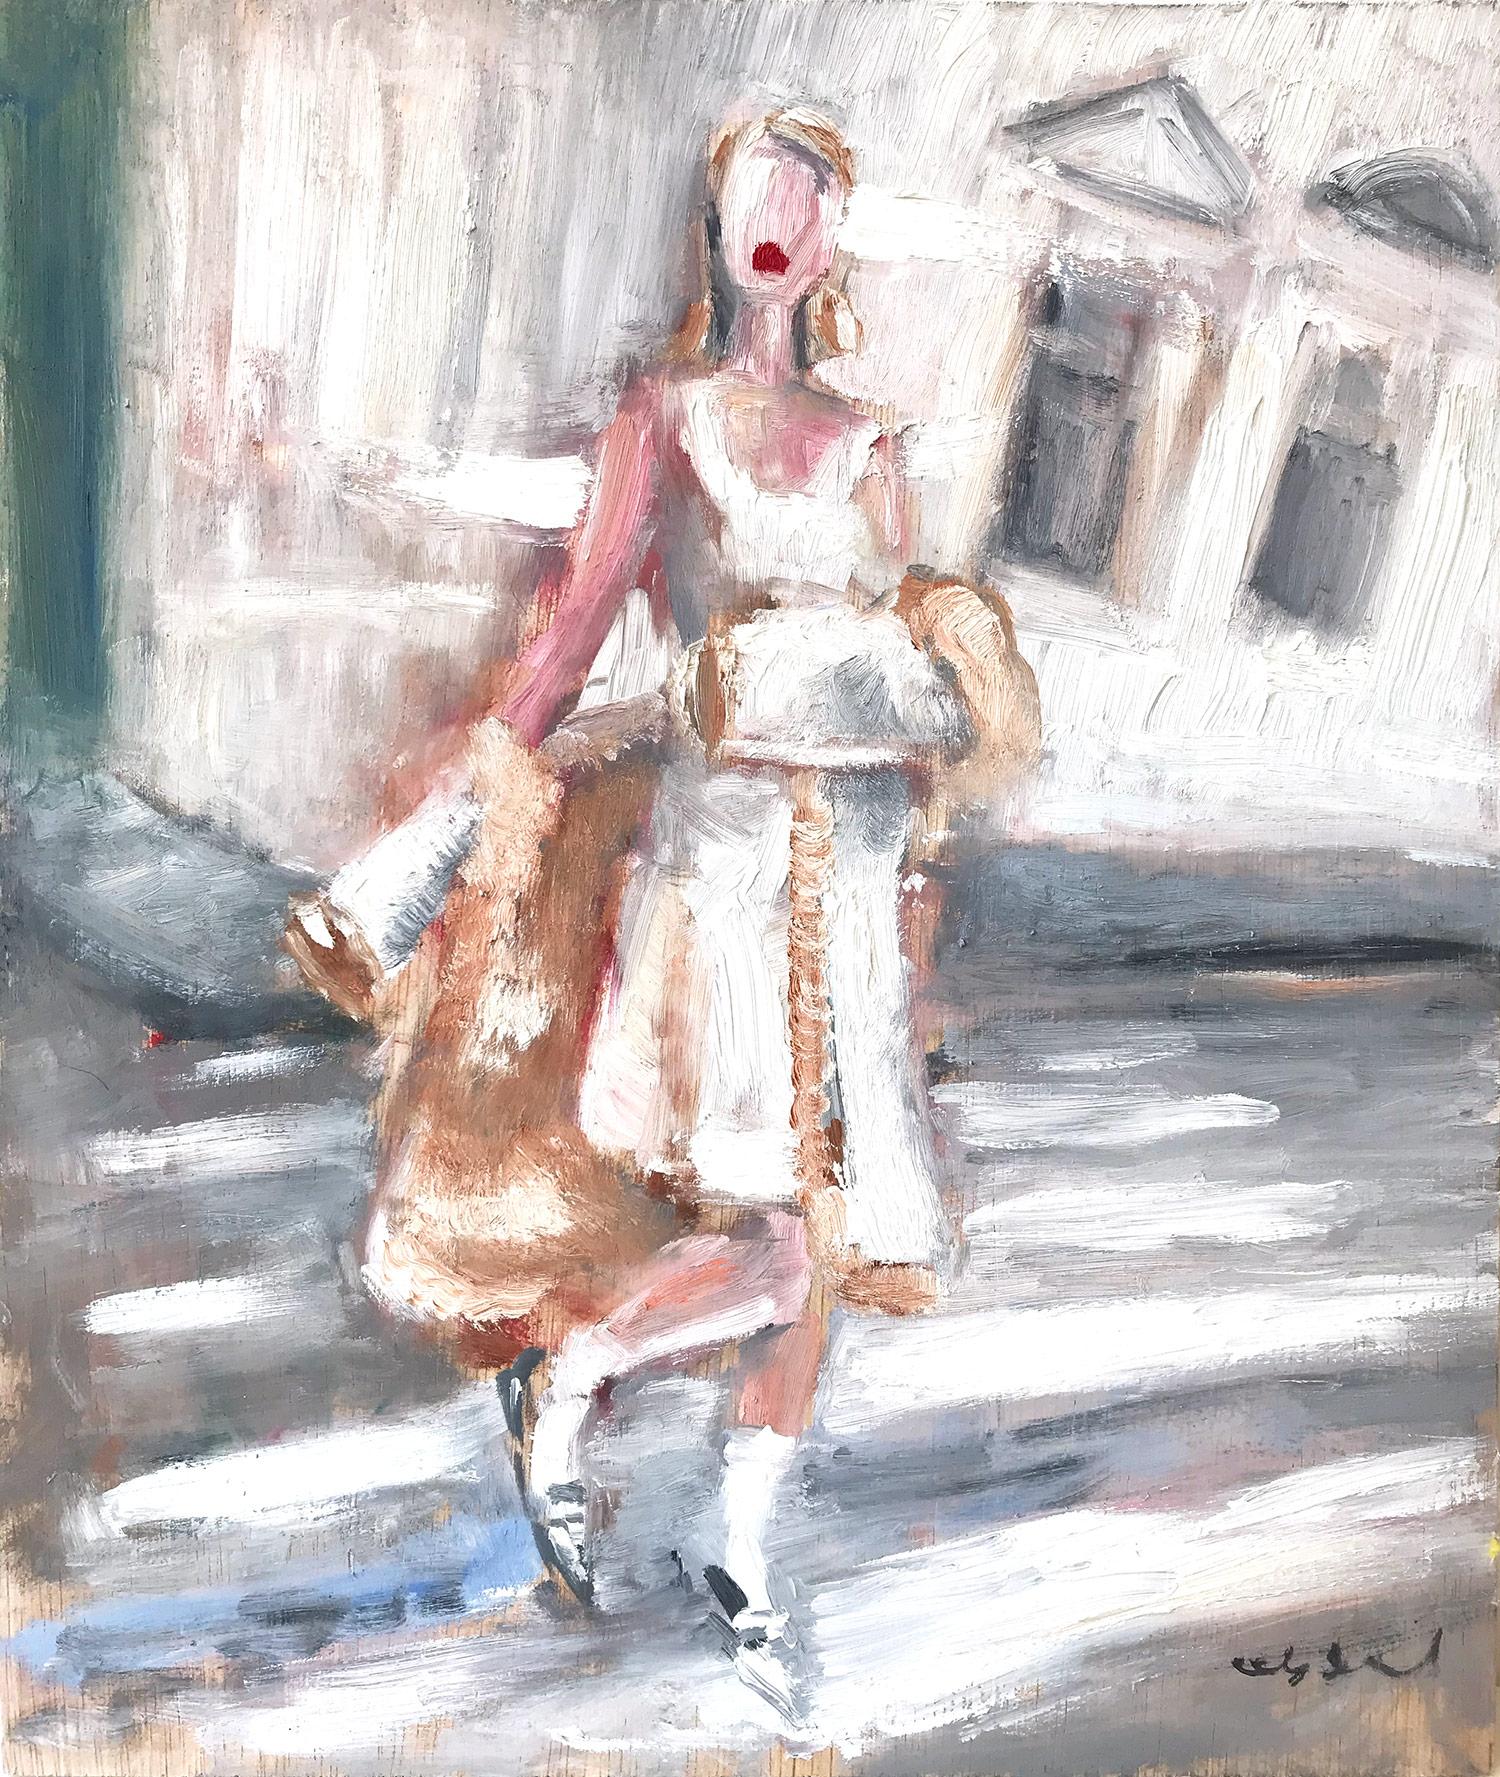 "Stepping Out with Chloe" NYC Fashion in Chanel Impressionistic Oil Painting  